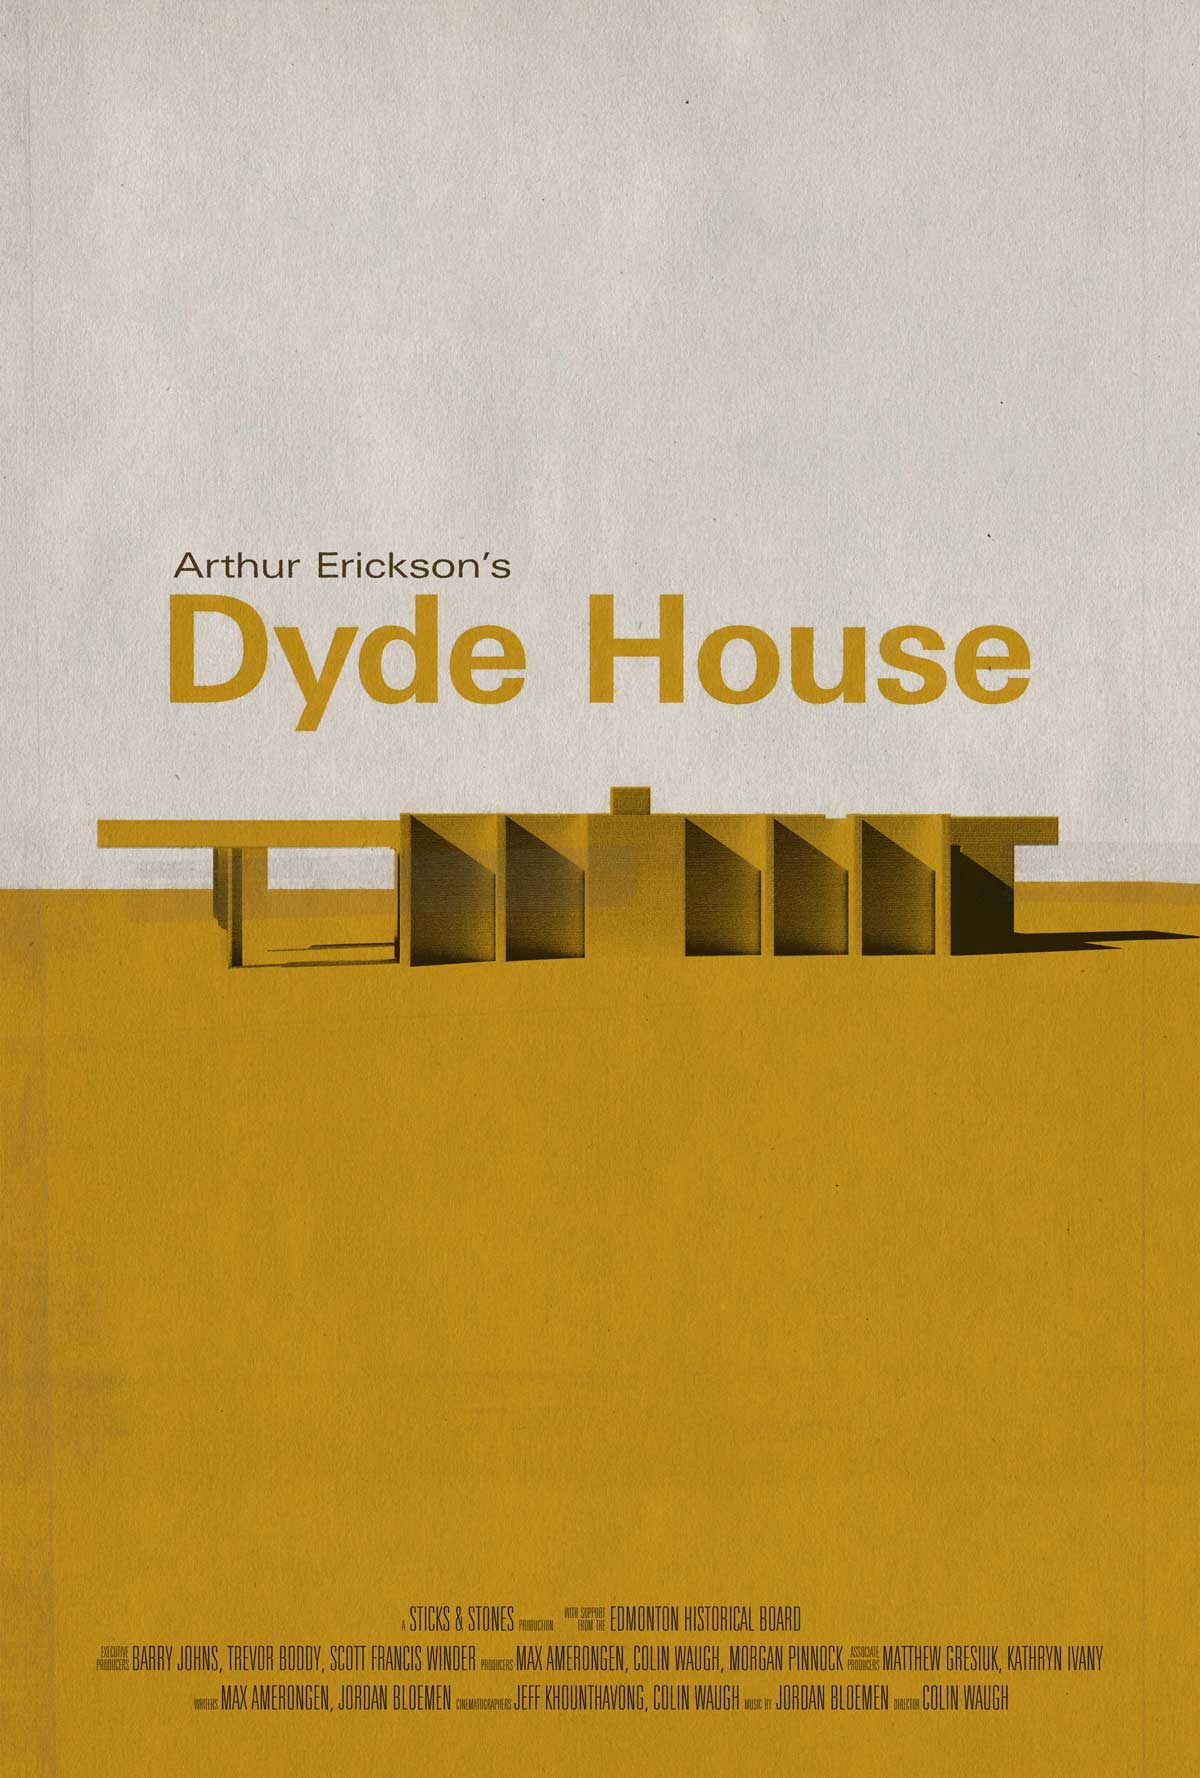 Promotional poster for Dyde House.